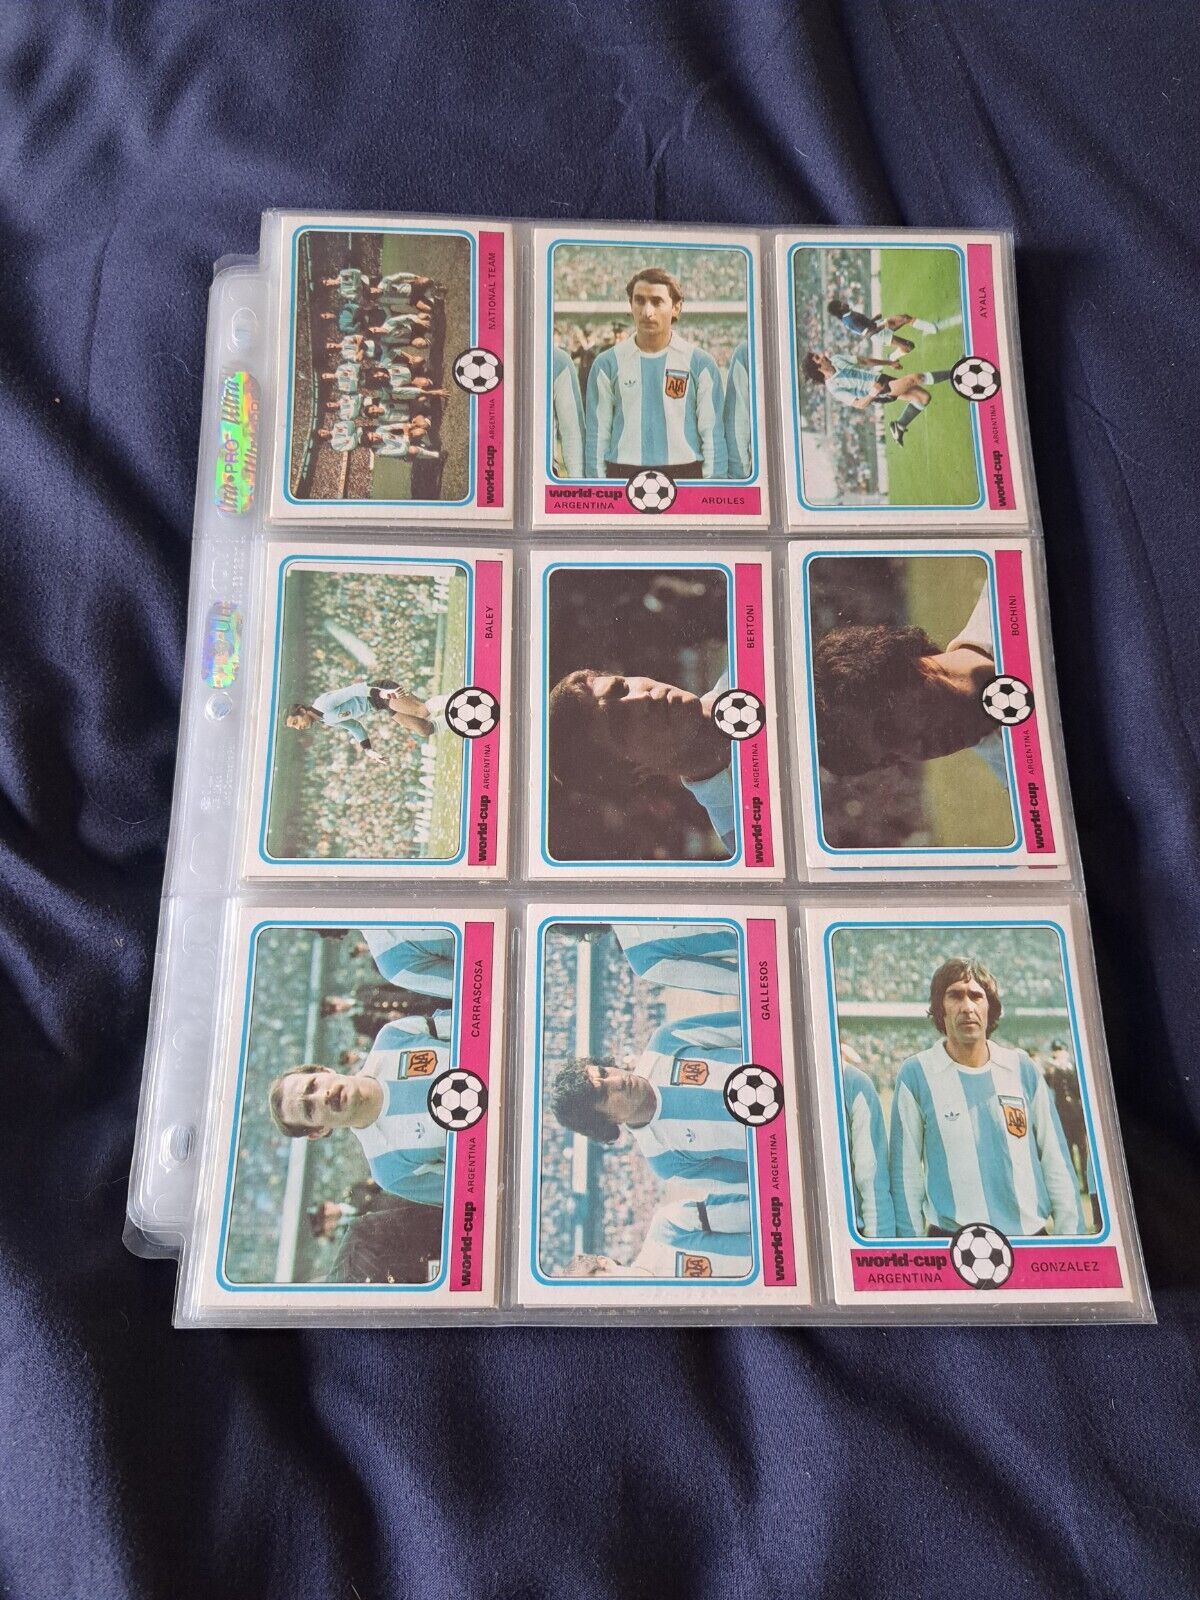 Monty gum 1978 football world cup 78 trading card full set 224 superb condition